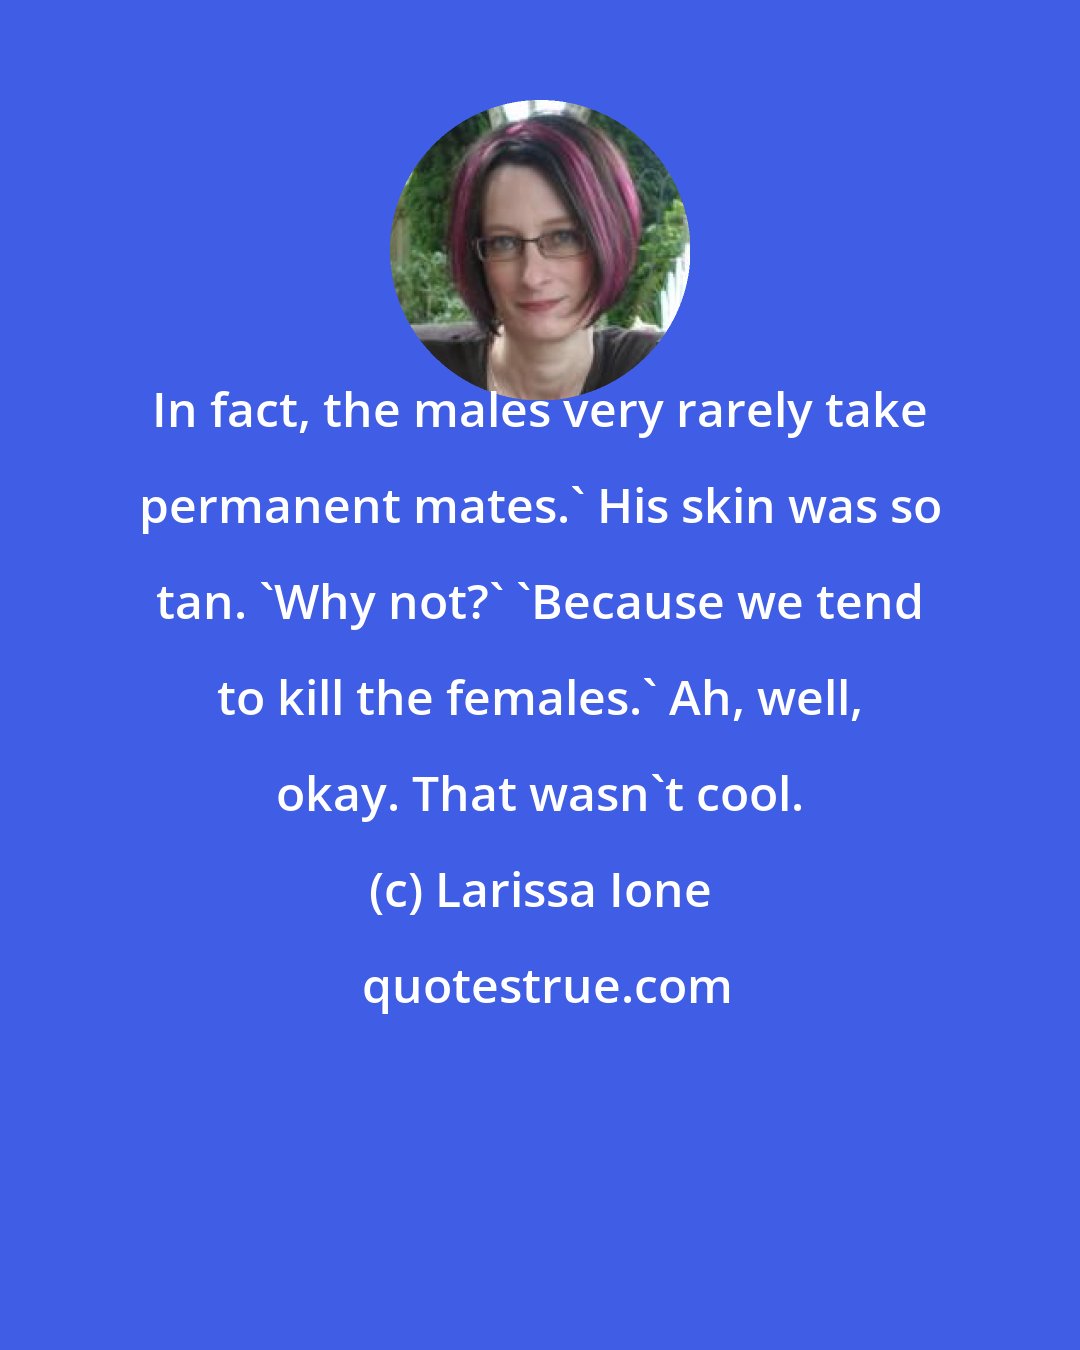 Larissa Ione: In fact, the males very rarely take permanent mates.' His skin was so tan. 'Why not?' 'Because we tend to kill the females.' Ah, well, okay. That wasn't cool.